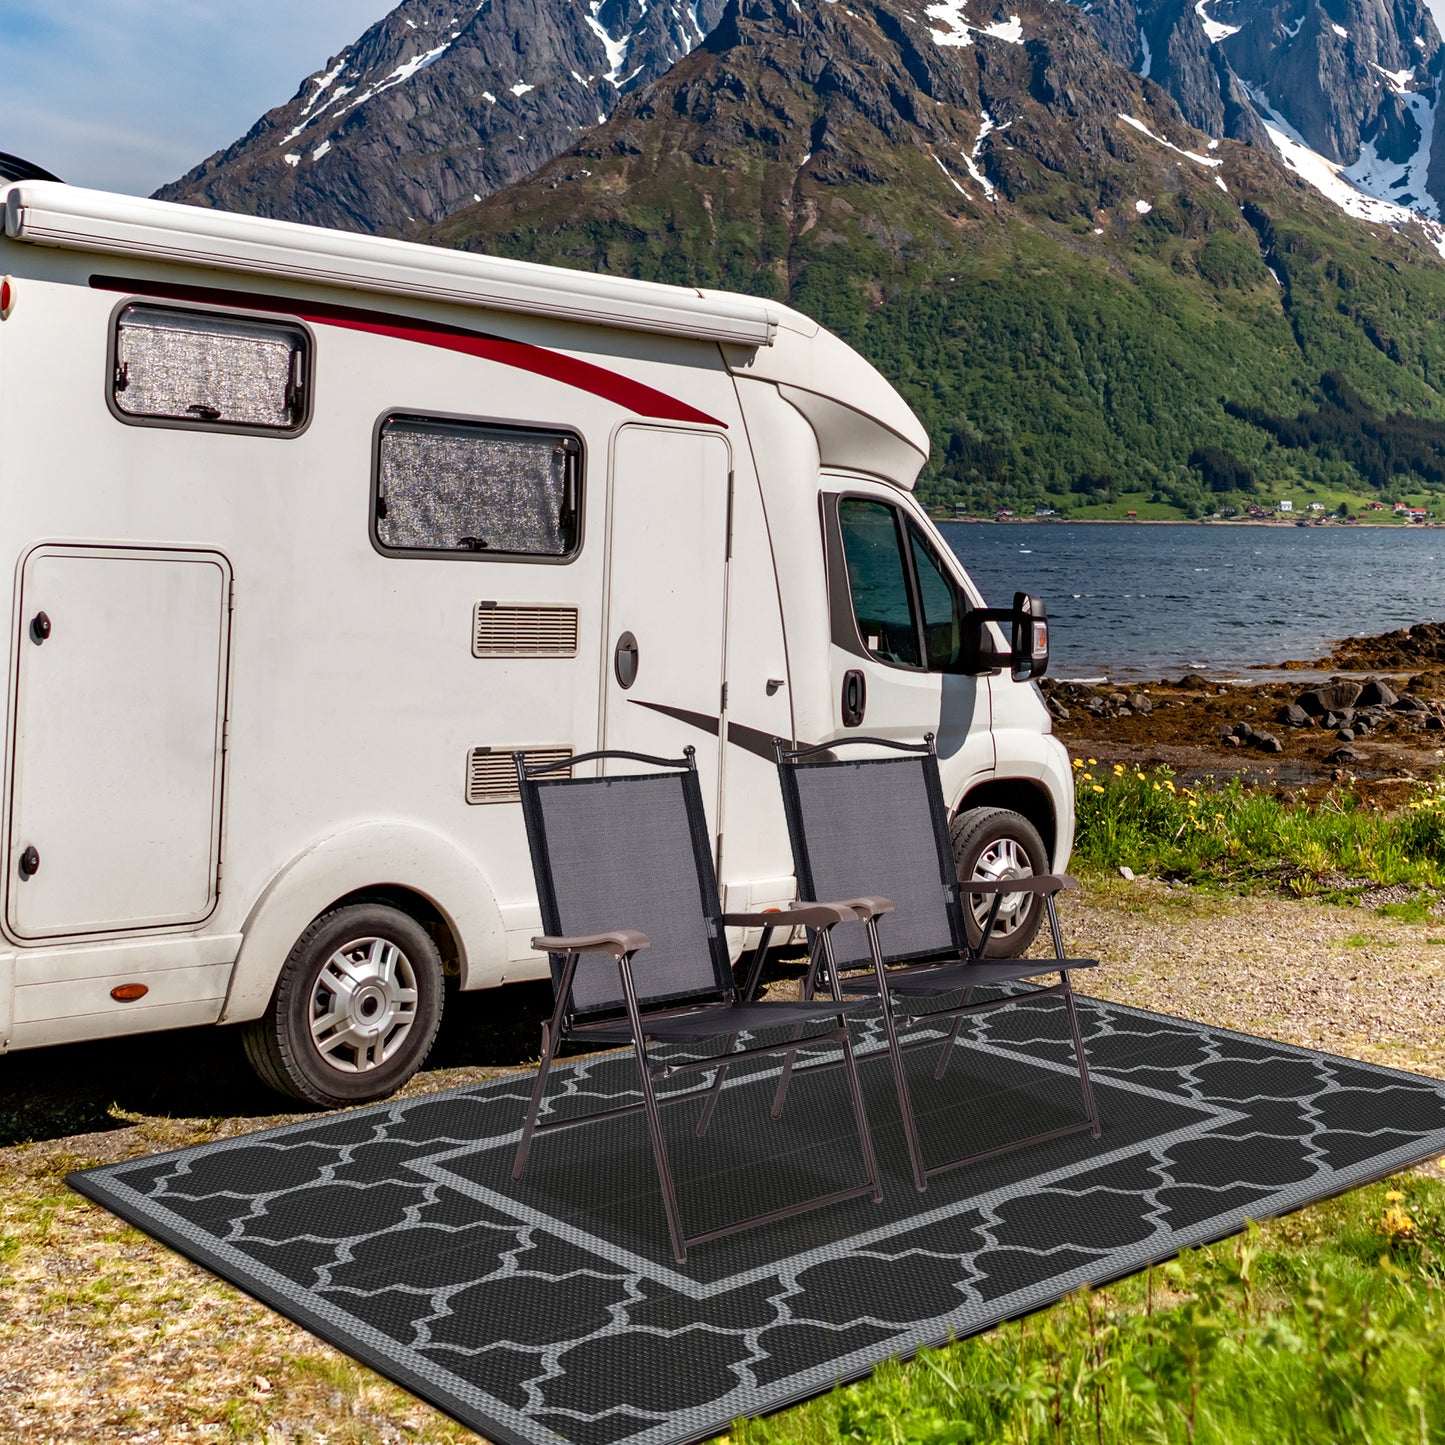 GENIMO Outdoor Rug for Patio,Reversible Plastic Waterproof Rugs,Clearance Mat,Rv,Camping,Porch,Deck,Camper,Balcony